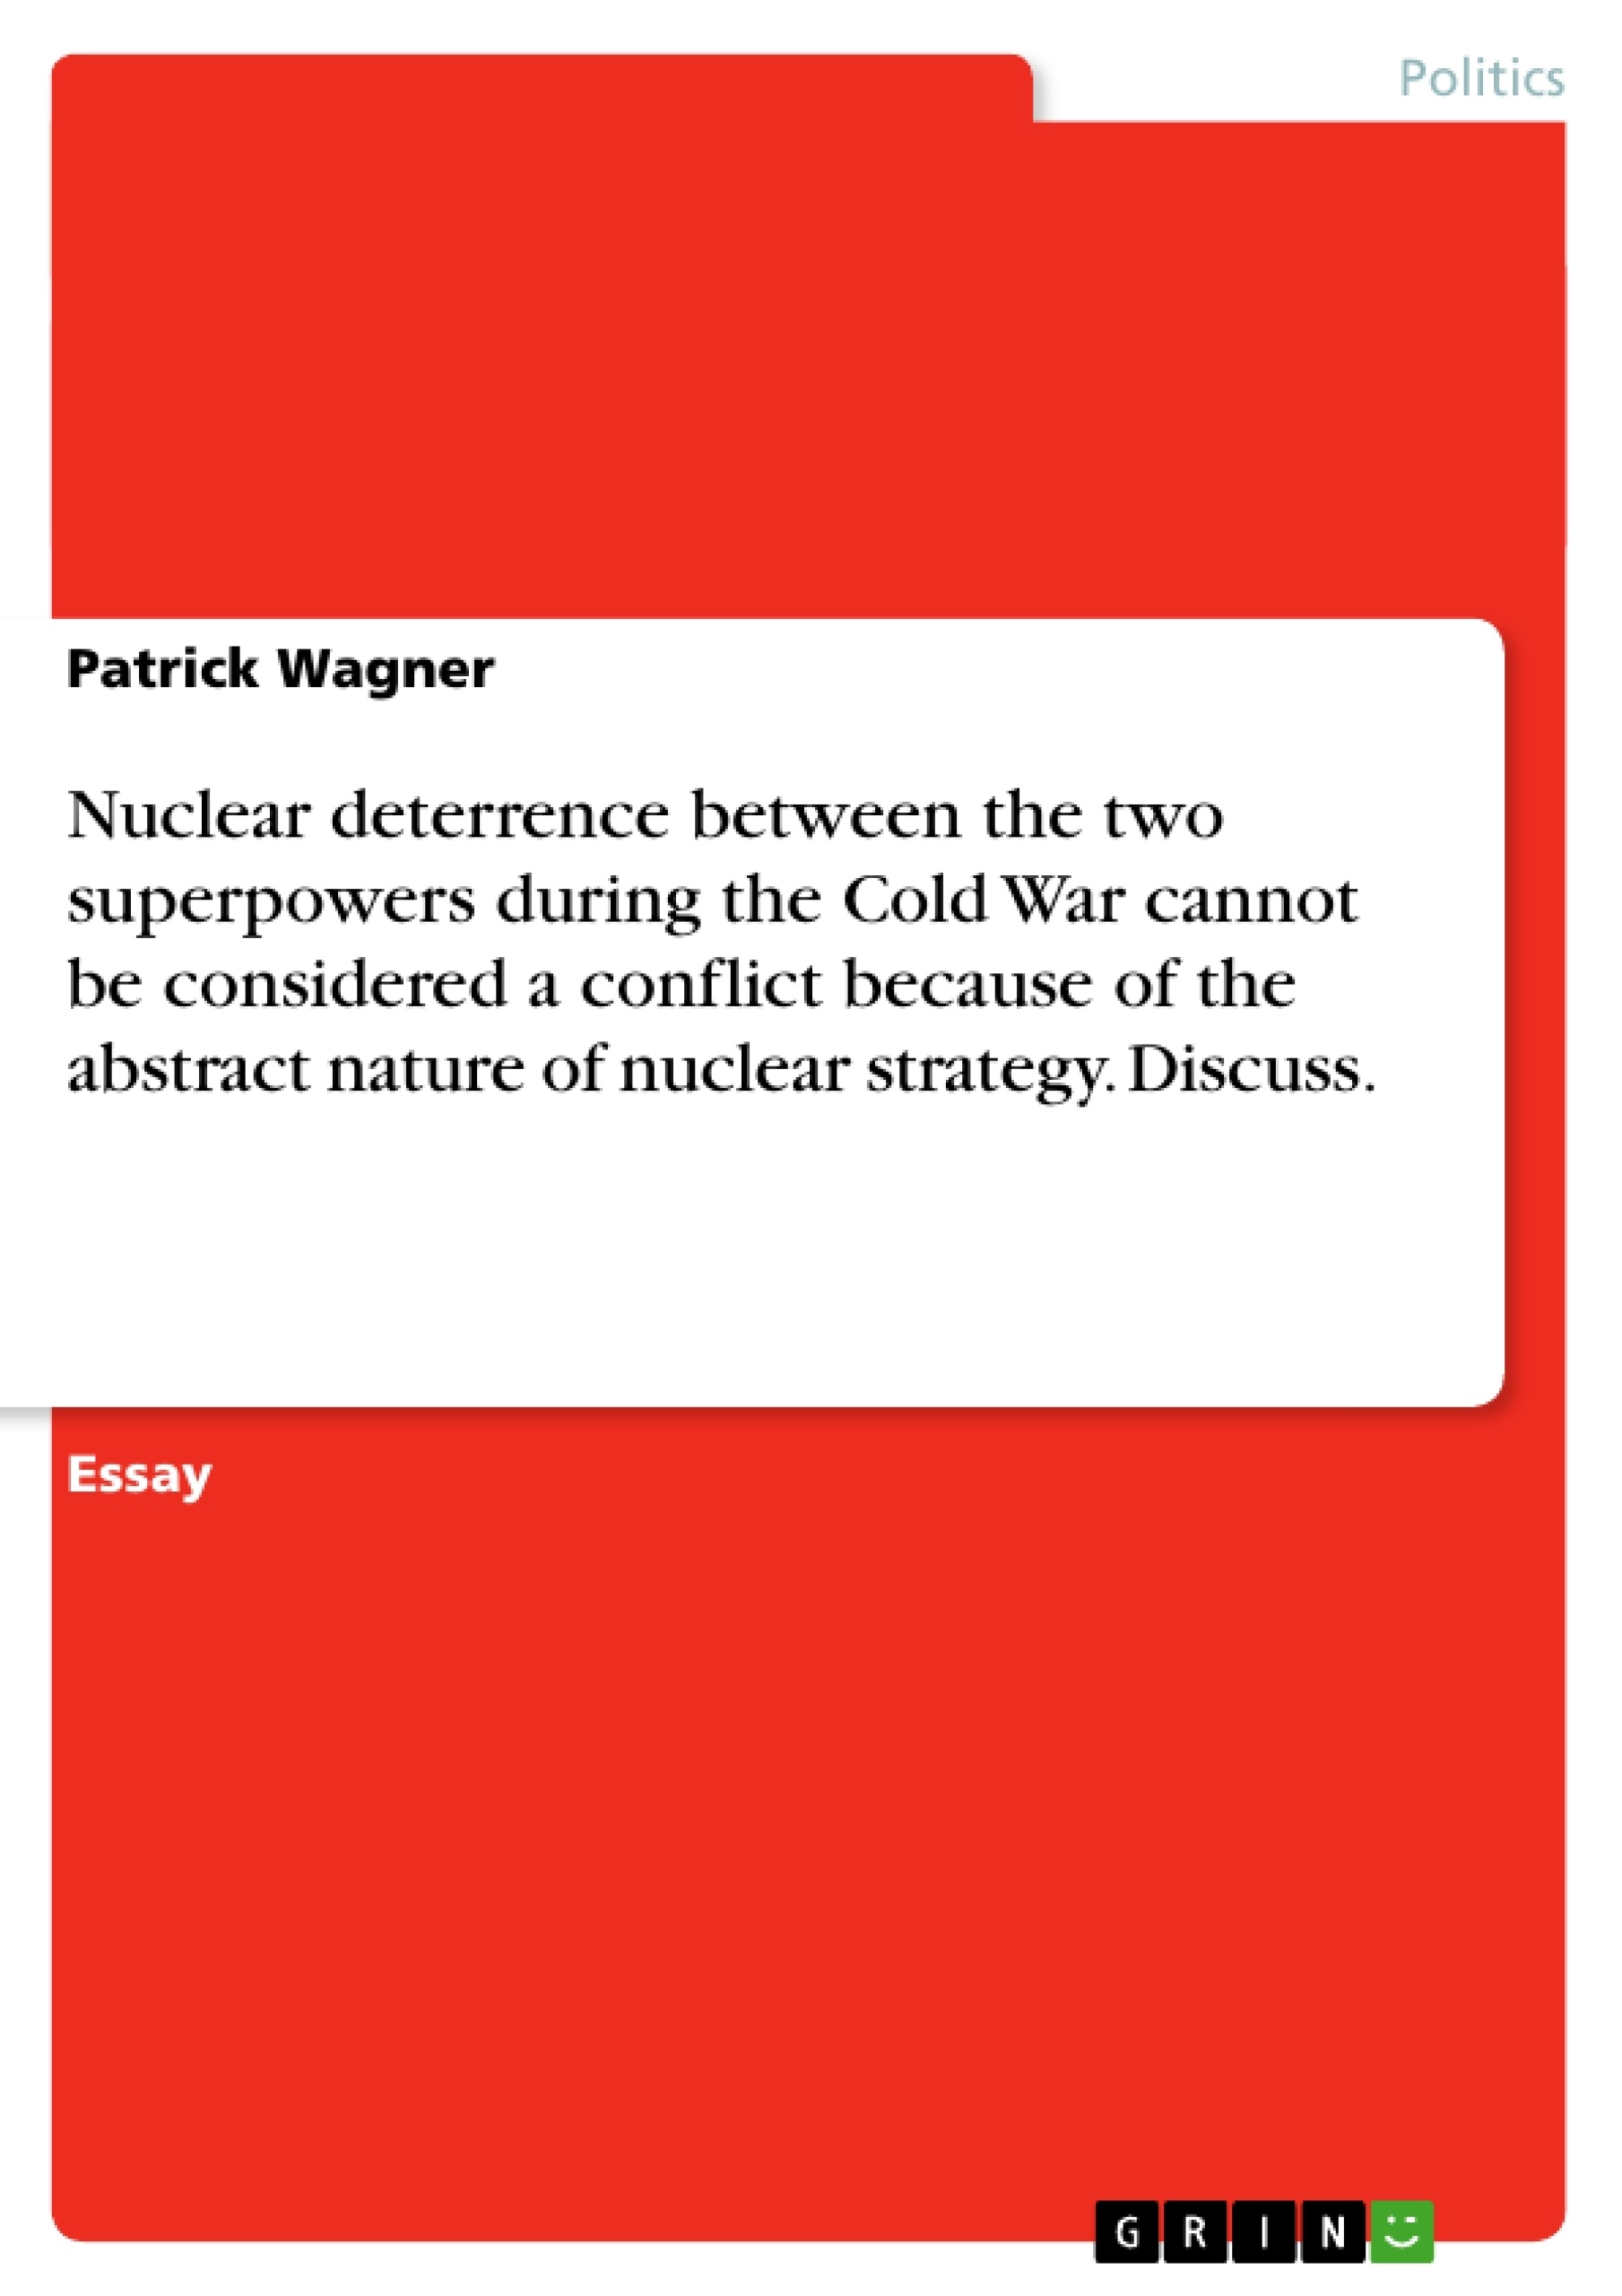 Título: Nuclear deterrence between the two superpowers during the Cold War cannot be considered a conflict because of the abstract nature of nuclear strategy. Discuss.